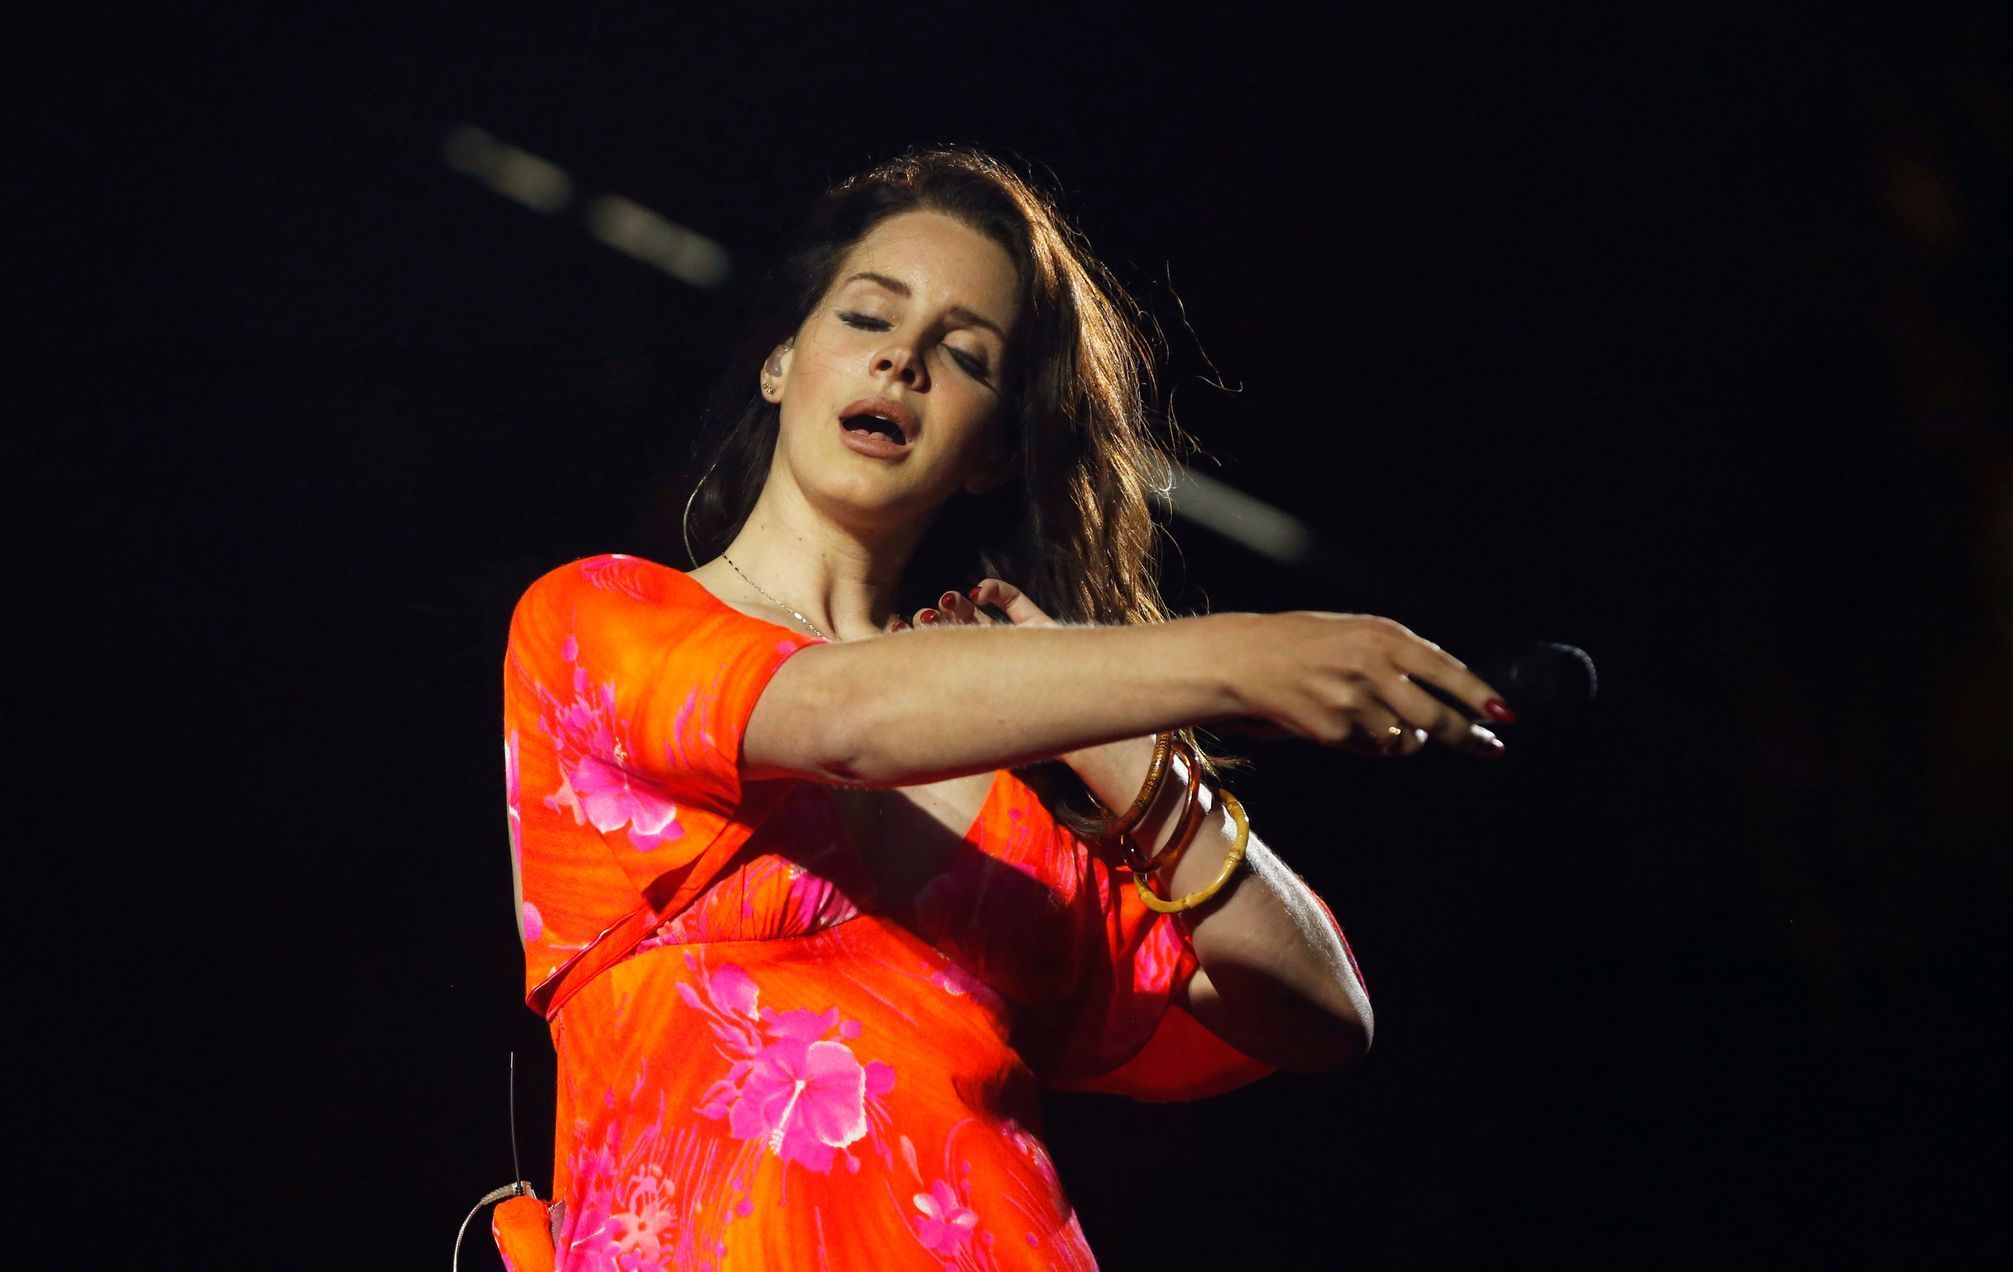 Singer Lana Del Rey performs at the Coachella Valley Music and Arts Festival in Indio